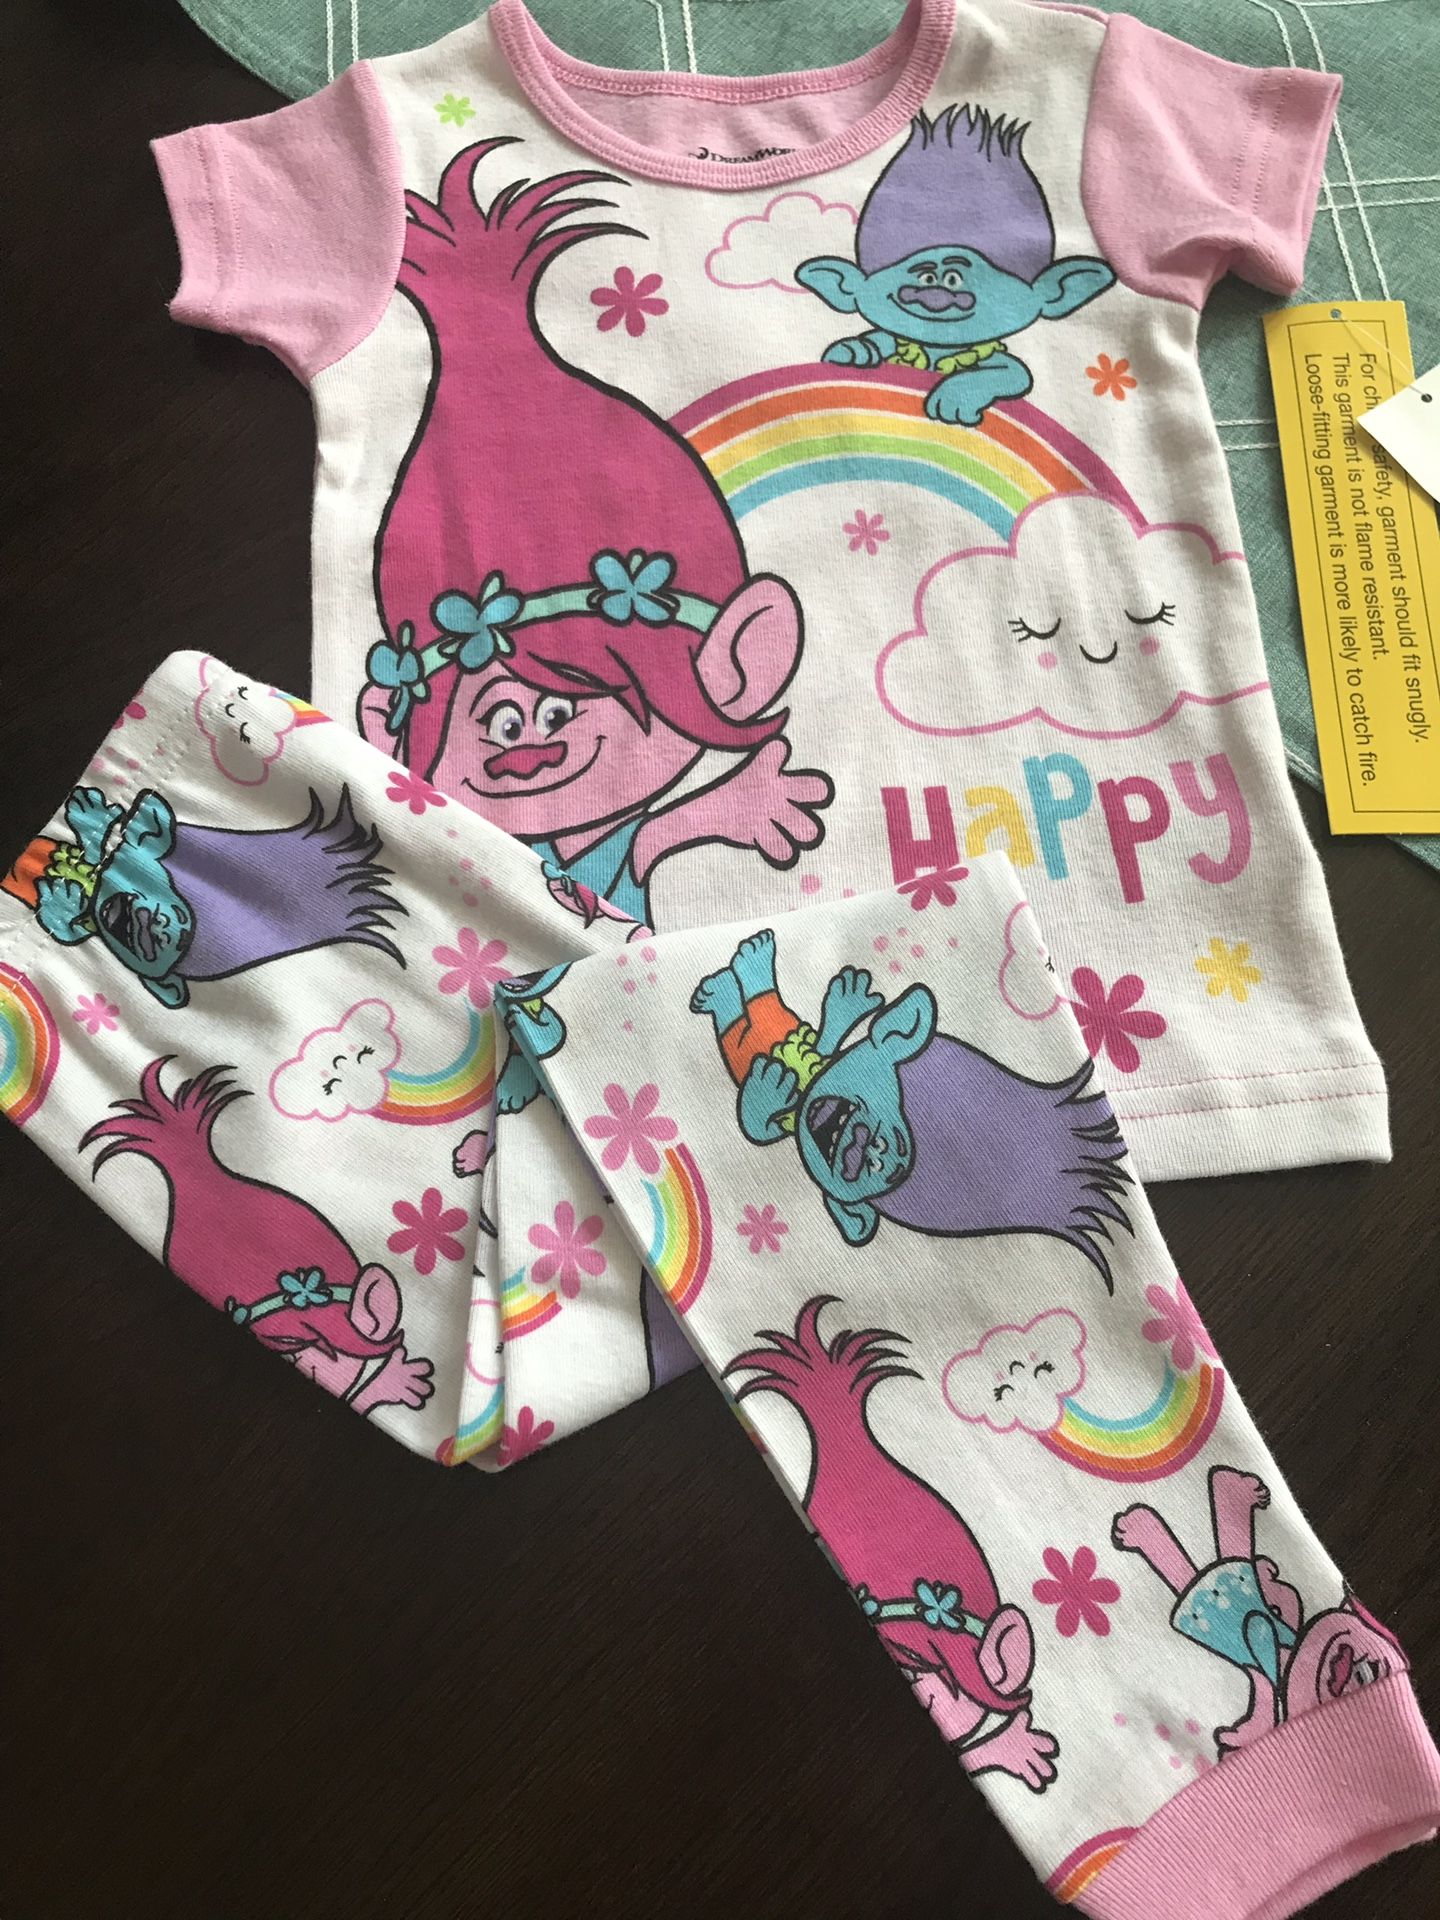 Trolls pajamas 2-pc size 3T with tags